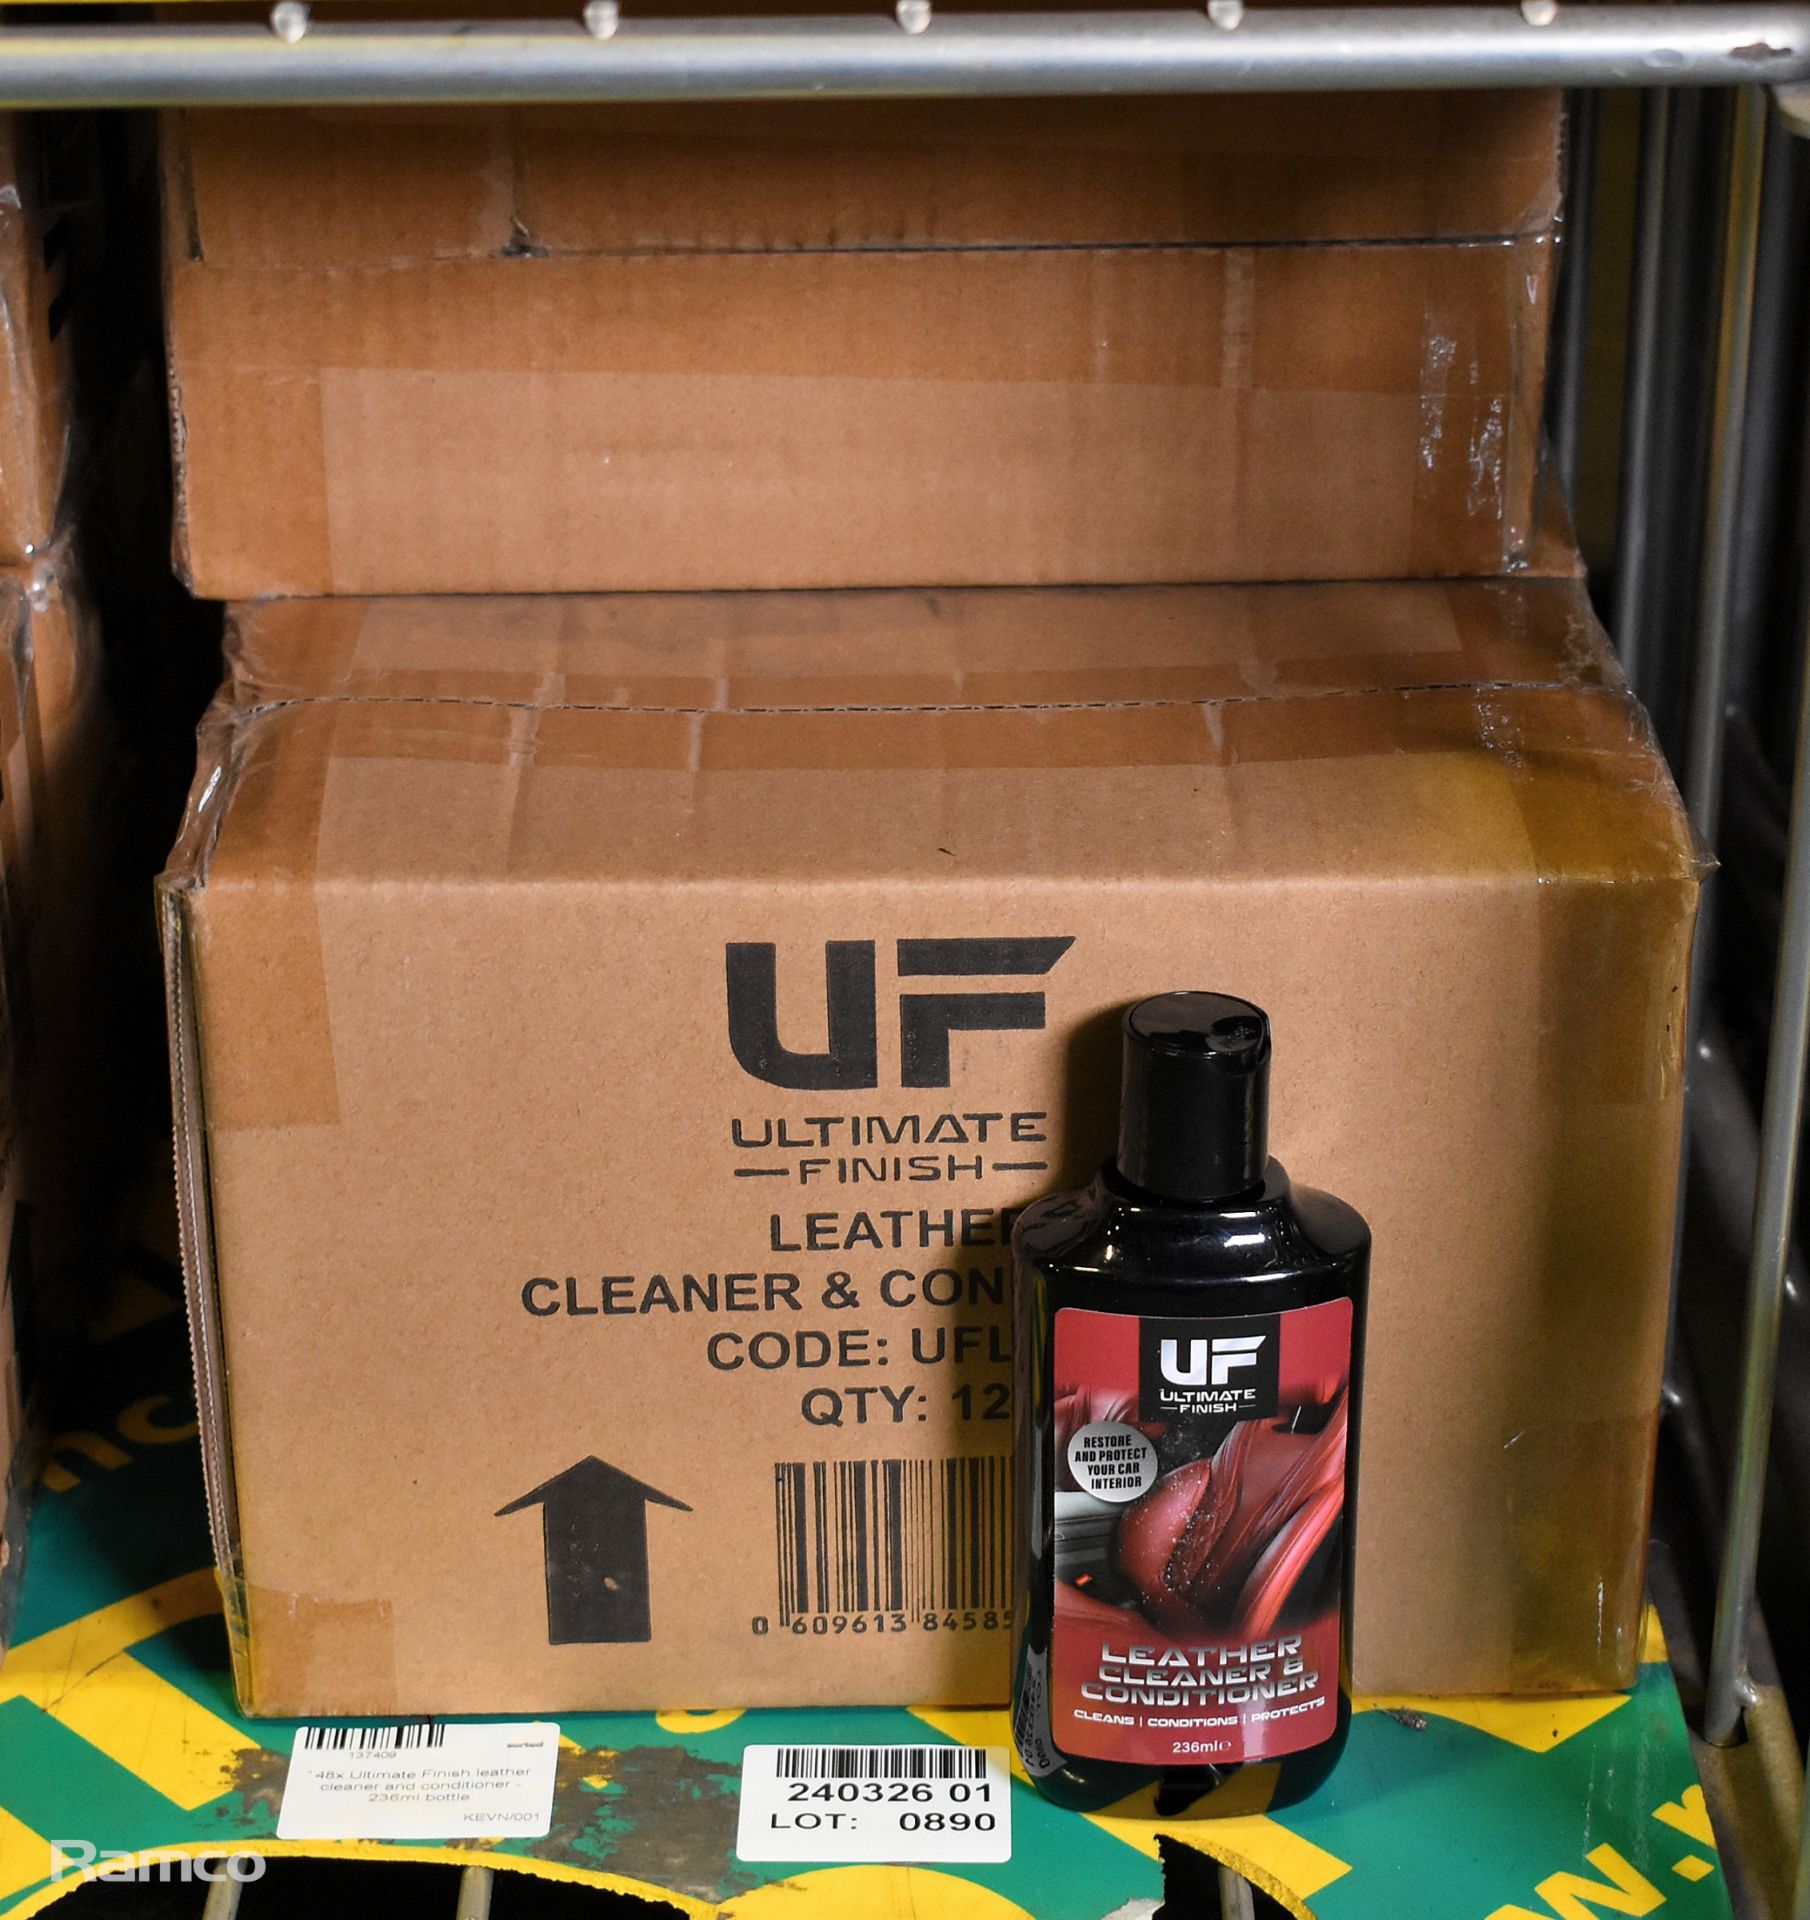 48x bottles of Ultimate Finish leather cleaner and conditioner - 236ml - Image 4 of 4